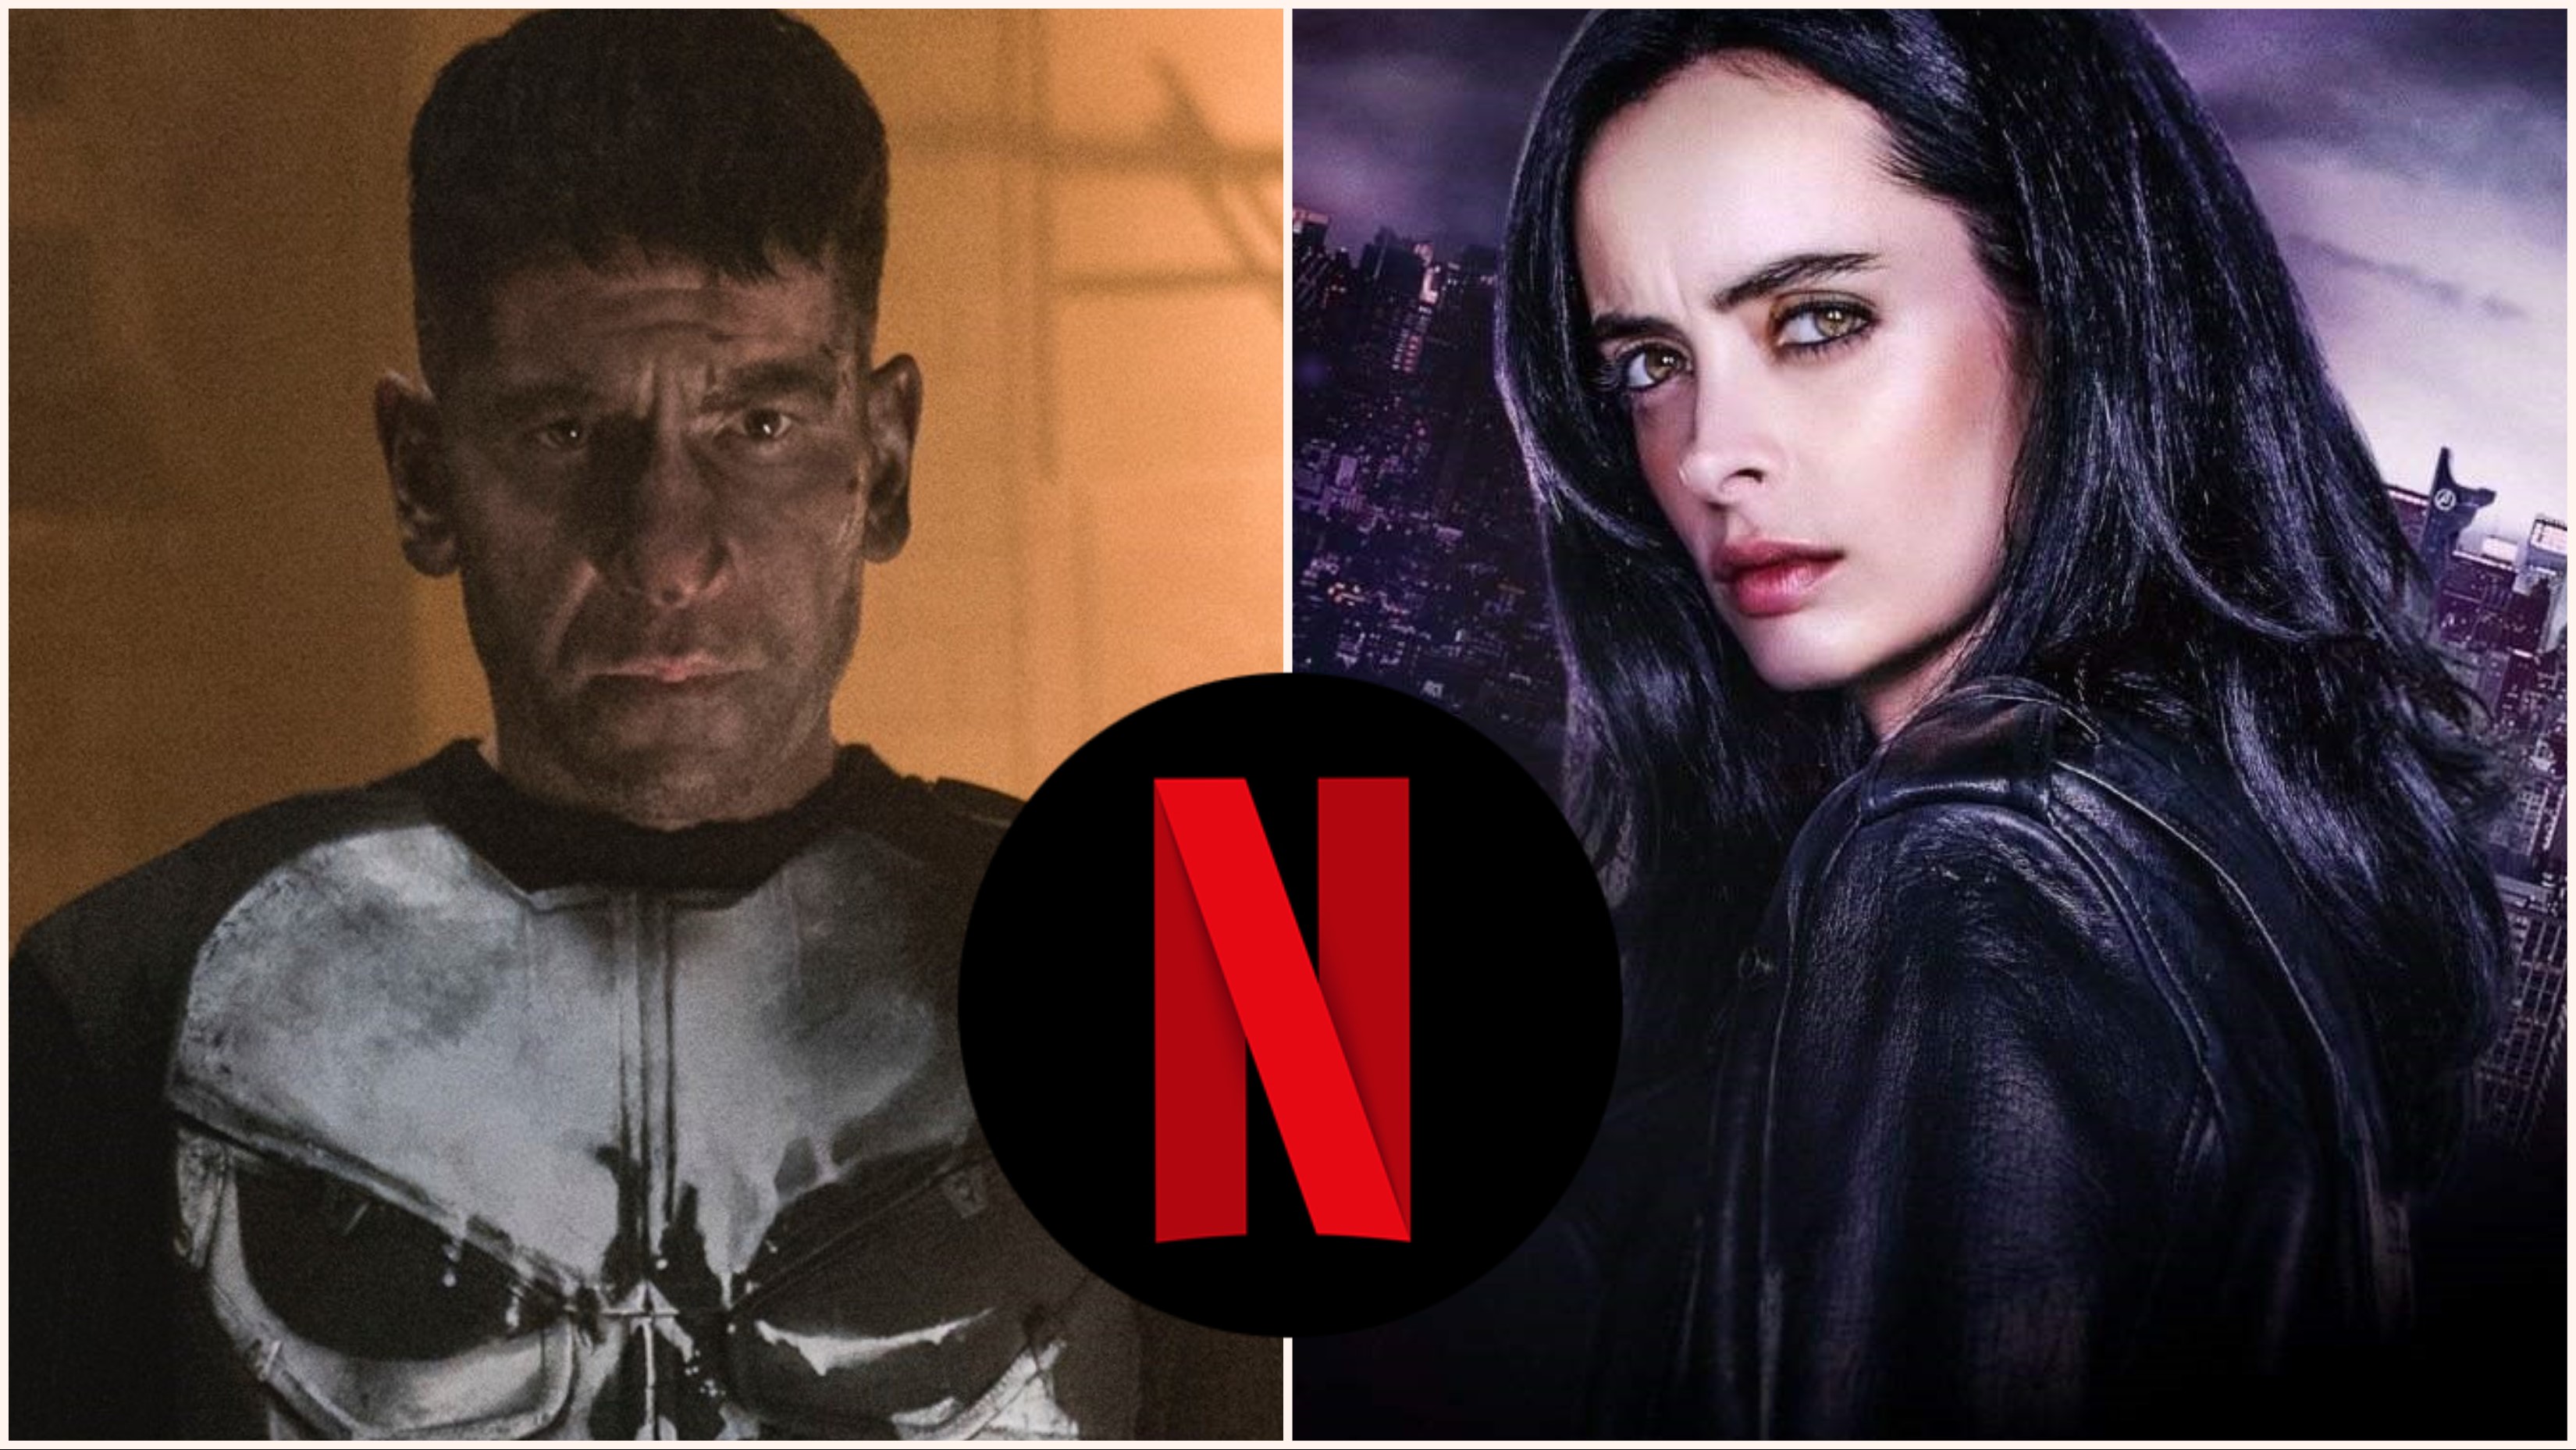 Netflix has officially cancelled The Punisher and Jessica Jones. There will be no more on-going Marvel series on Netflix after season 3 of Jessica Jones.